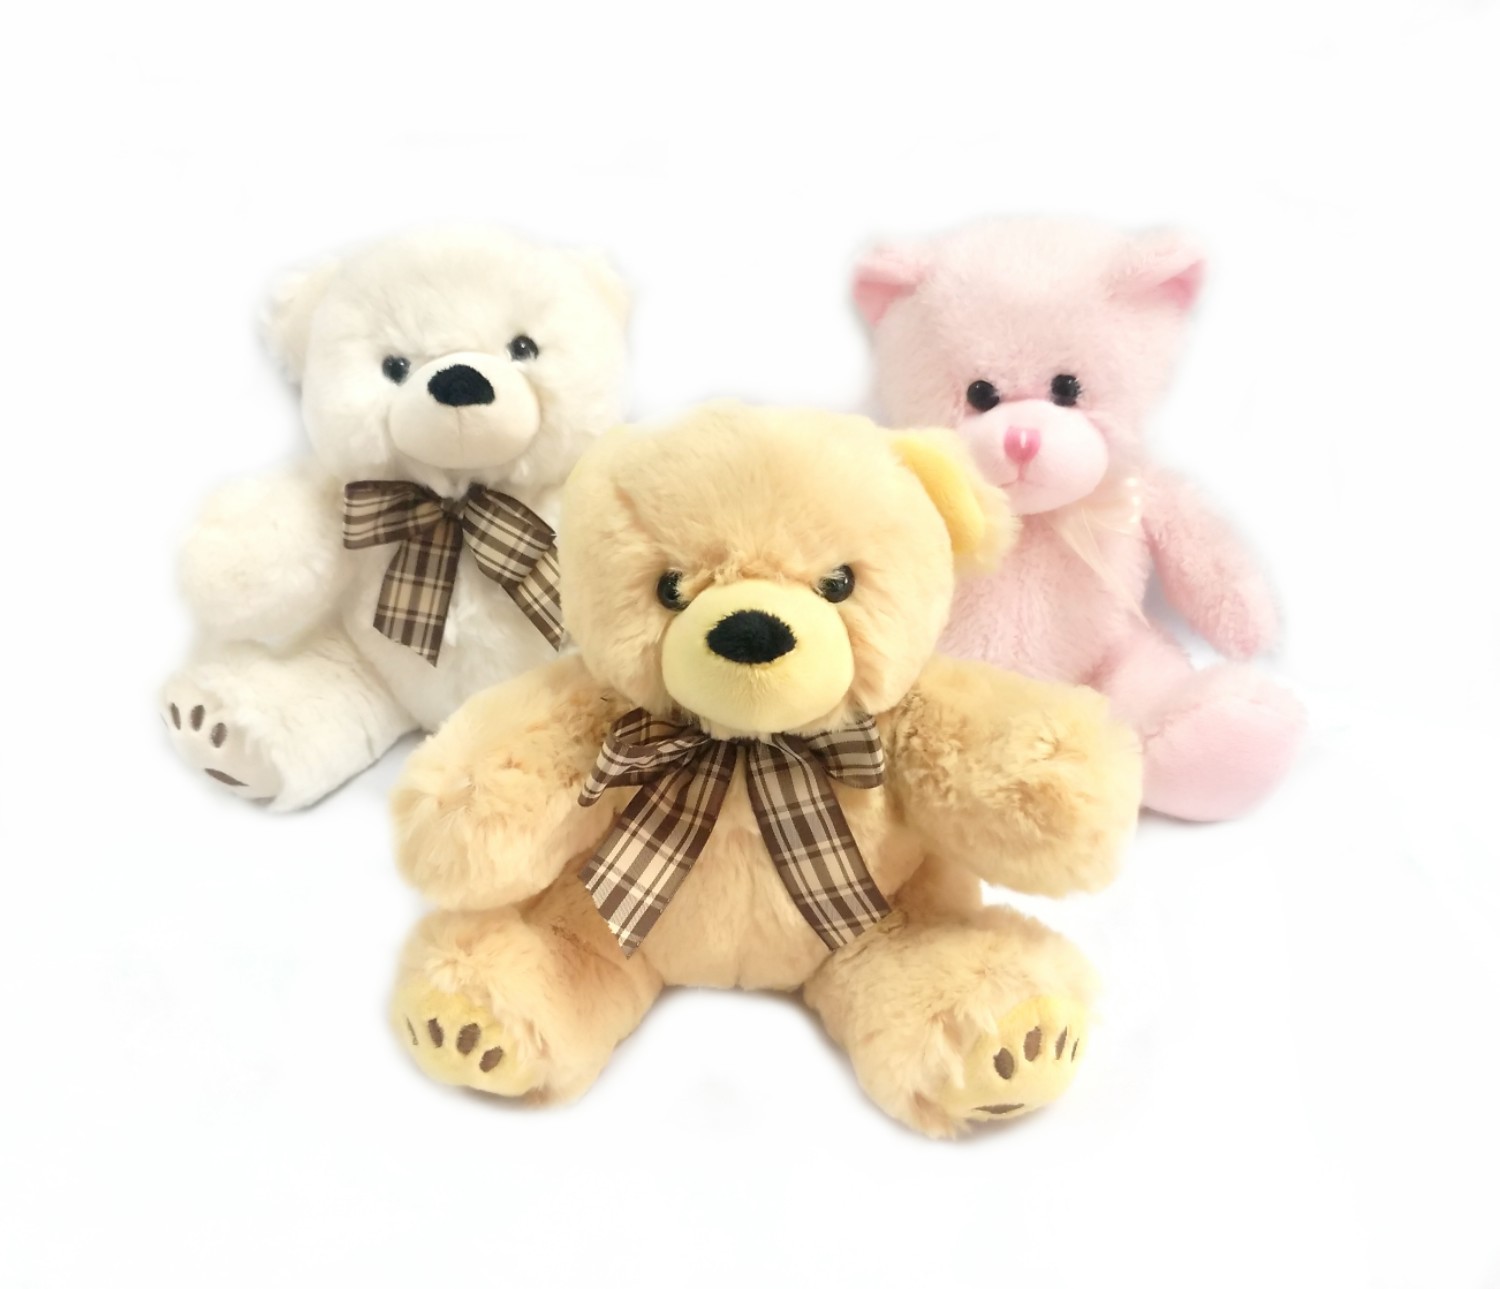 Customizable soft and fluffy brown teddy bear stuffed plush toy with long hair